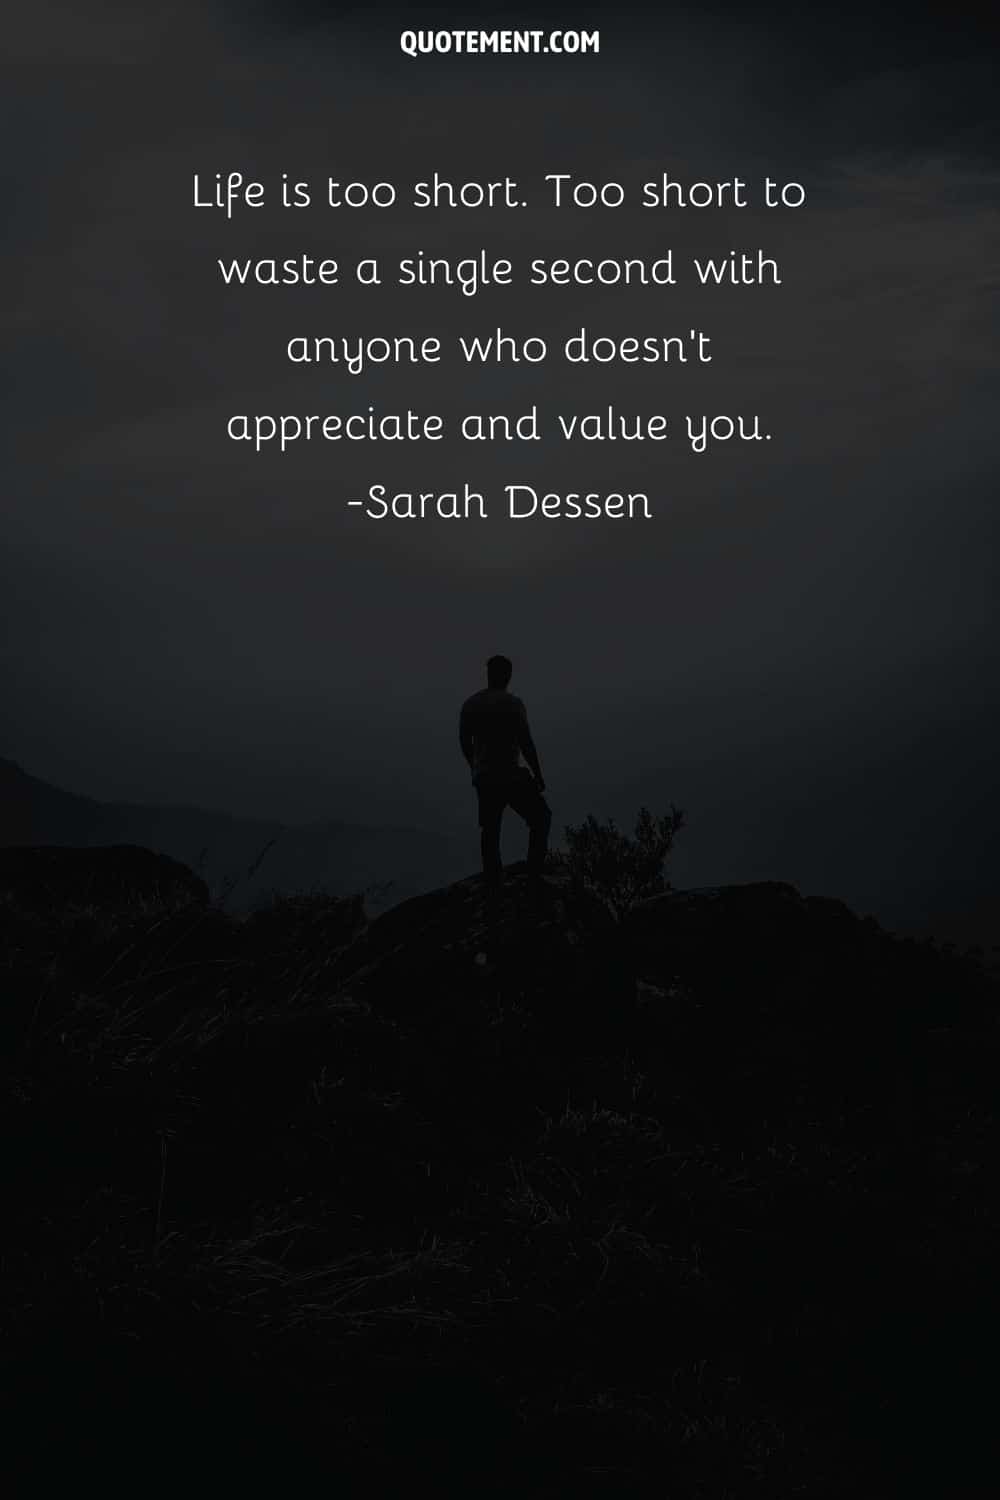 Life is too short. Too short to waste a single second with anyone who doesn’t appreciate and value you